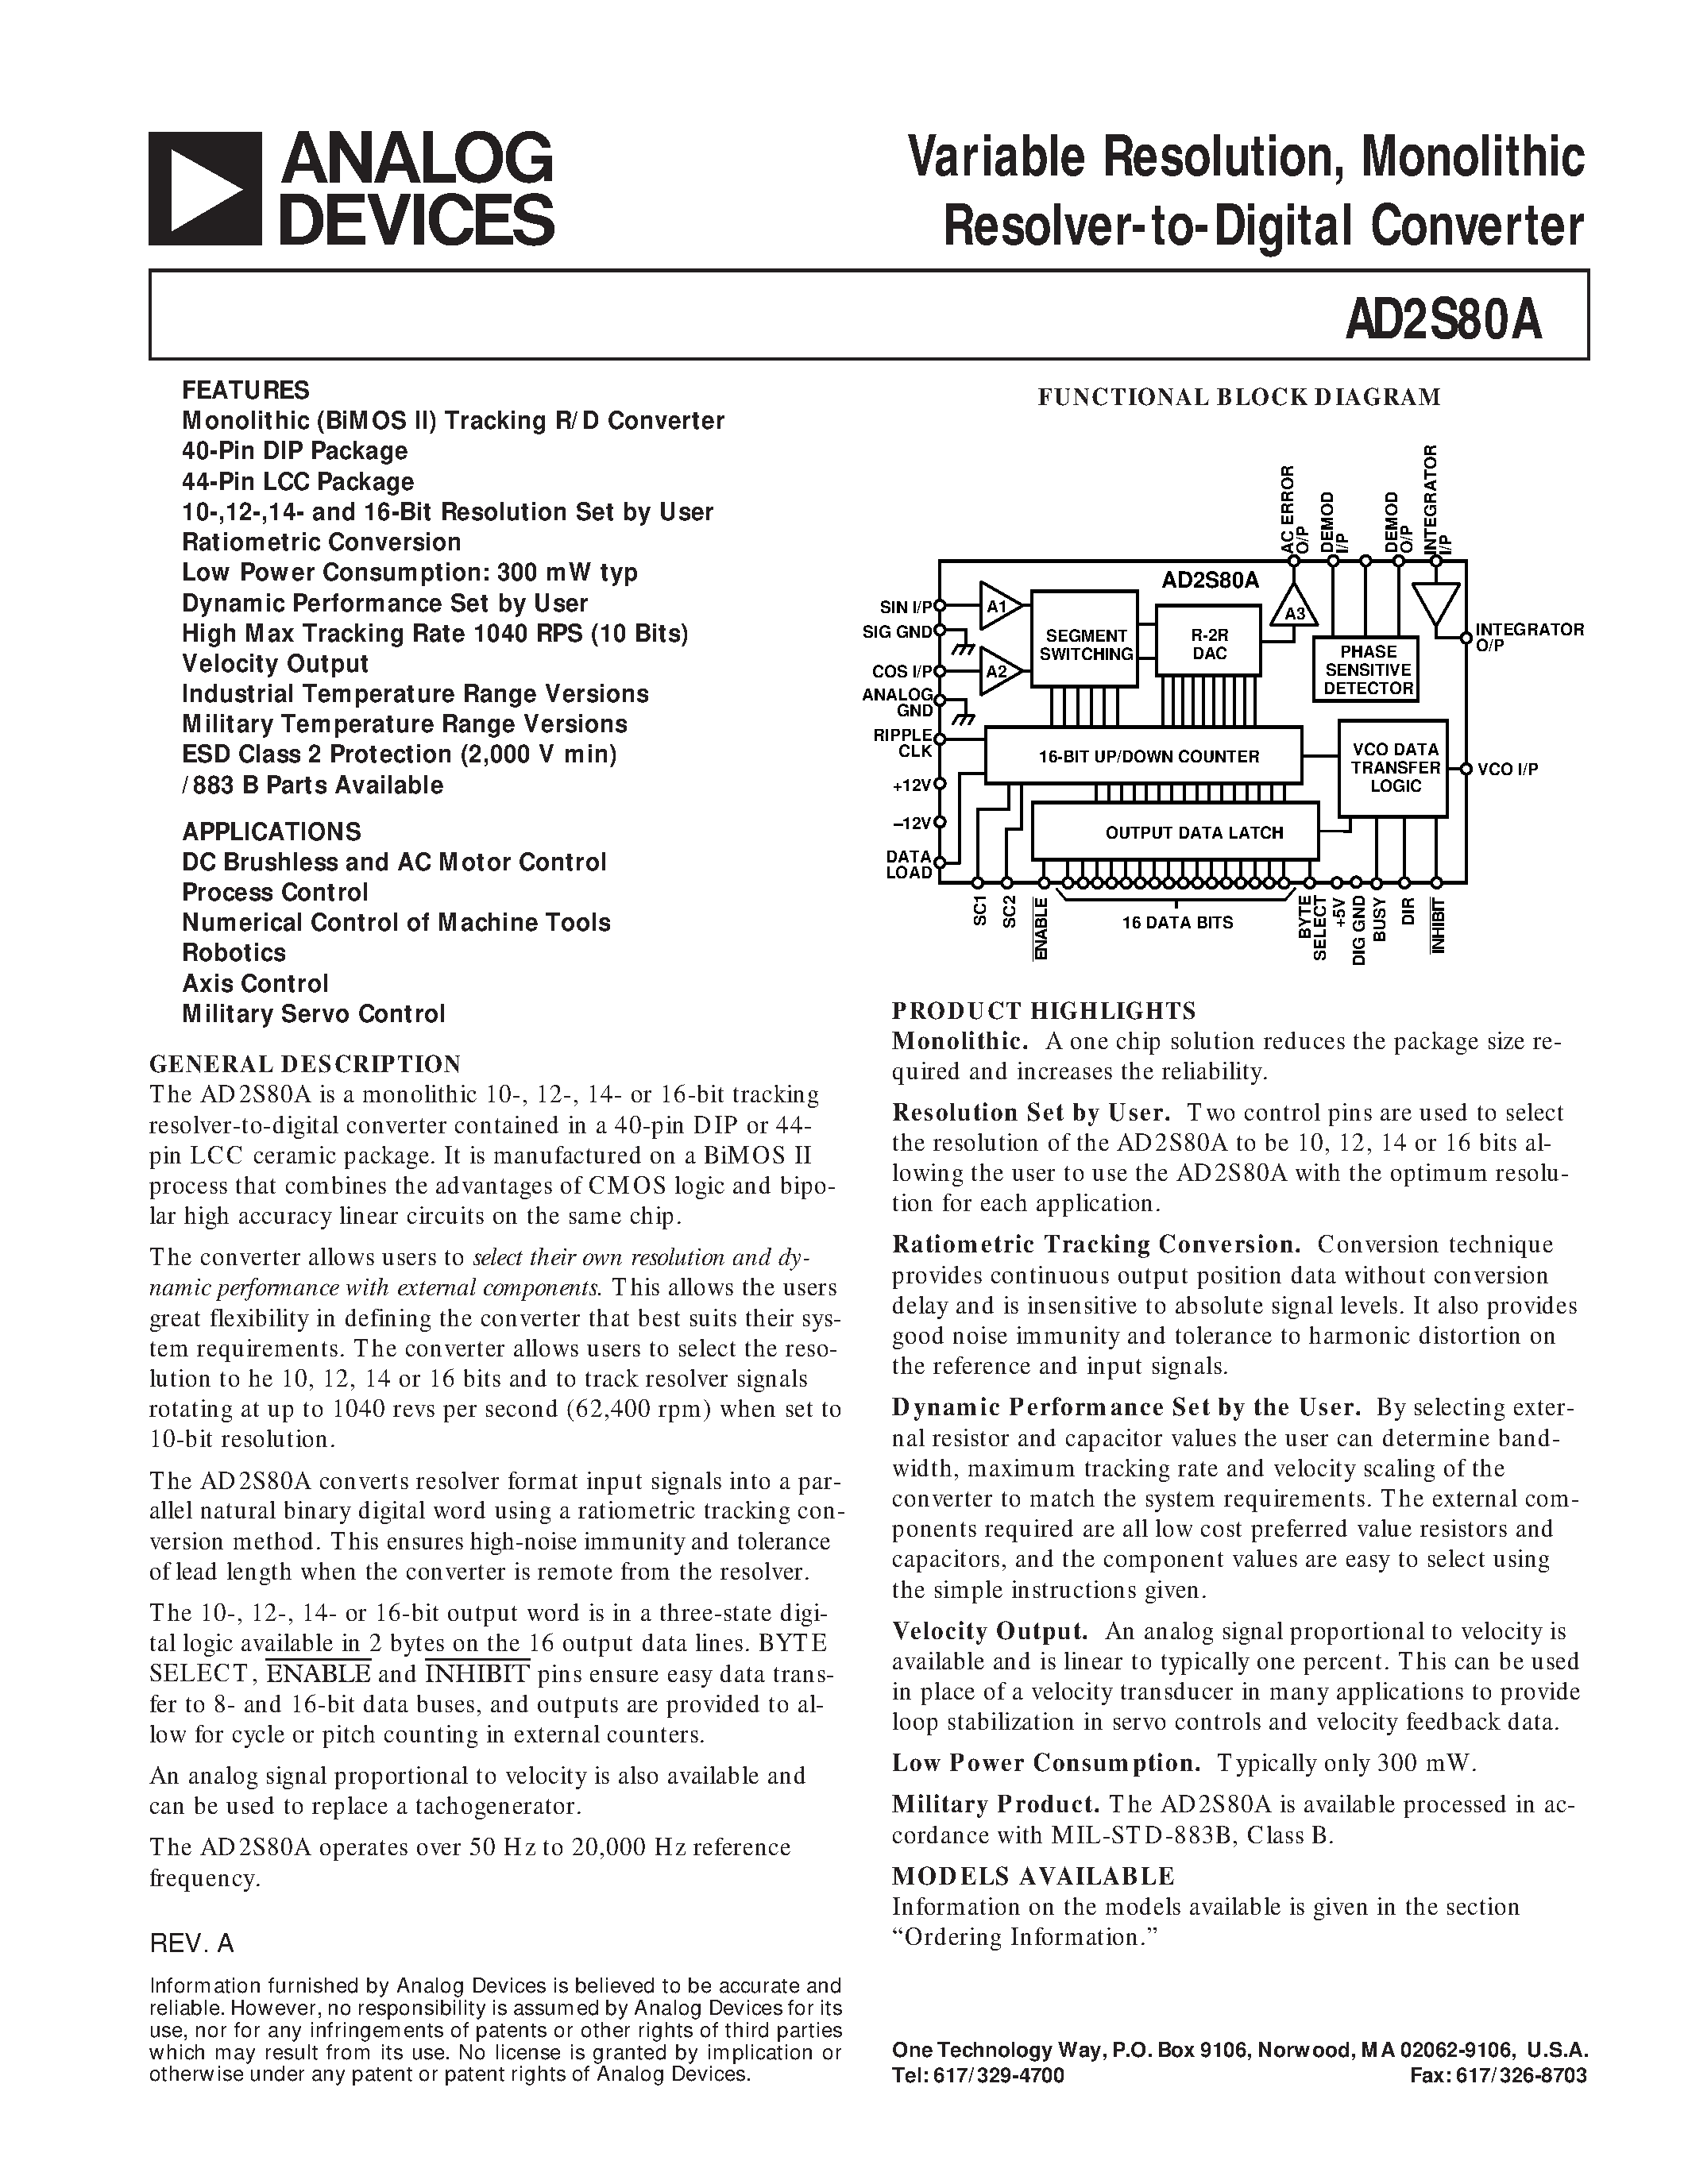 Datasheet AD2S80AUD - Variable Resolution/ Monolithic Resolver-to-Digital Converter page 1